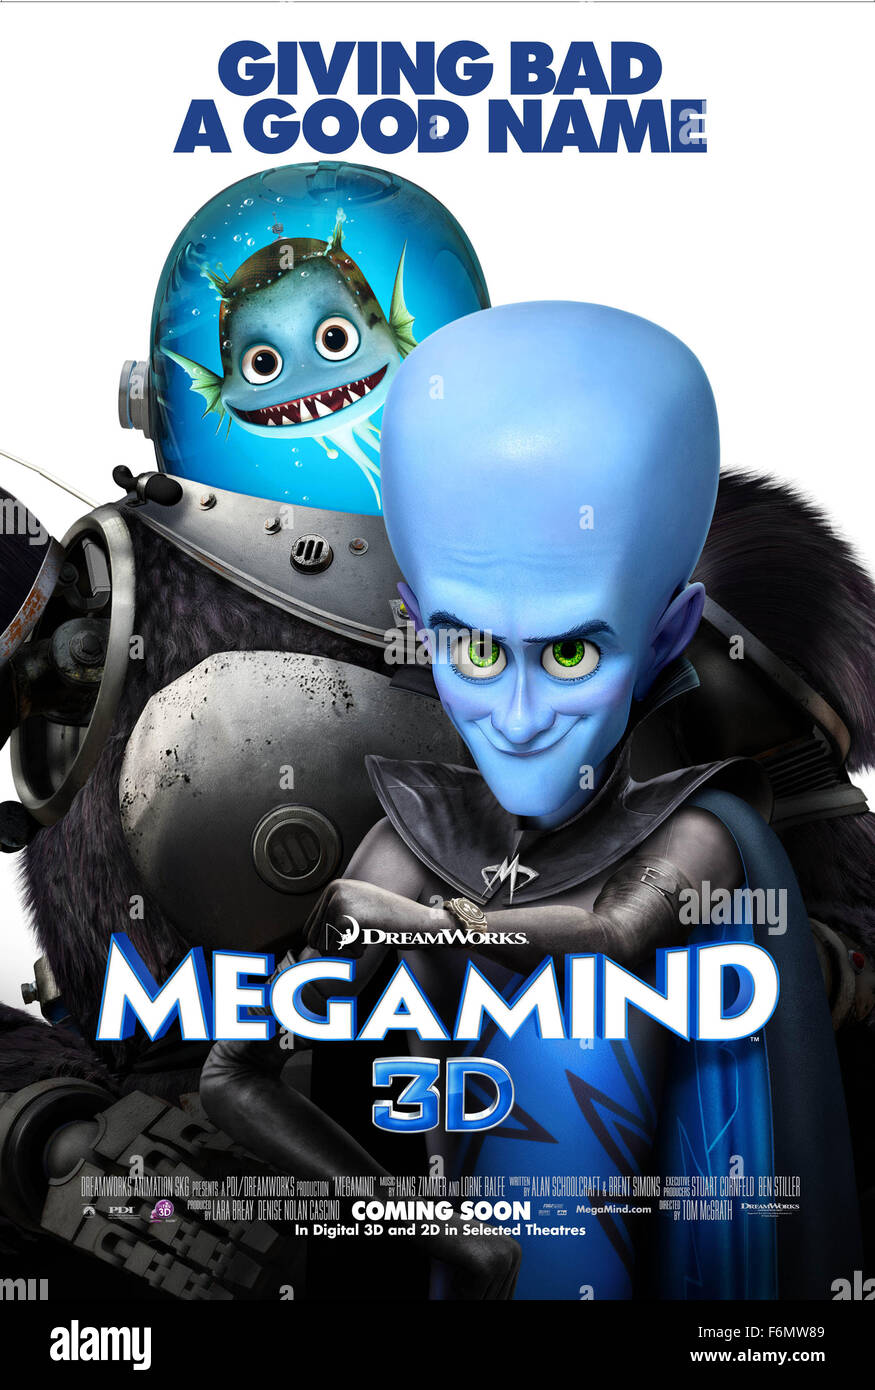 RELEASE DATE: November 5, 2010. MOVIE TITLE: Megamind. STUDIO: DreamWorks Animation. PLOT: The supervillain Megamind finally conquers his nemesis, the hero Metro Man... but finds his life pointless without a hero to fight. PICTURED: . Stock Photo